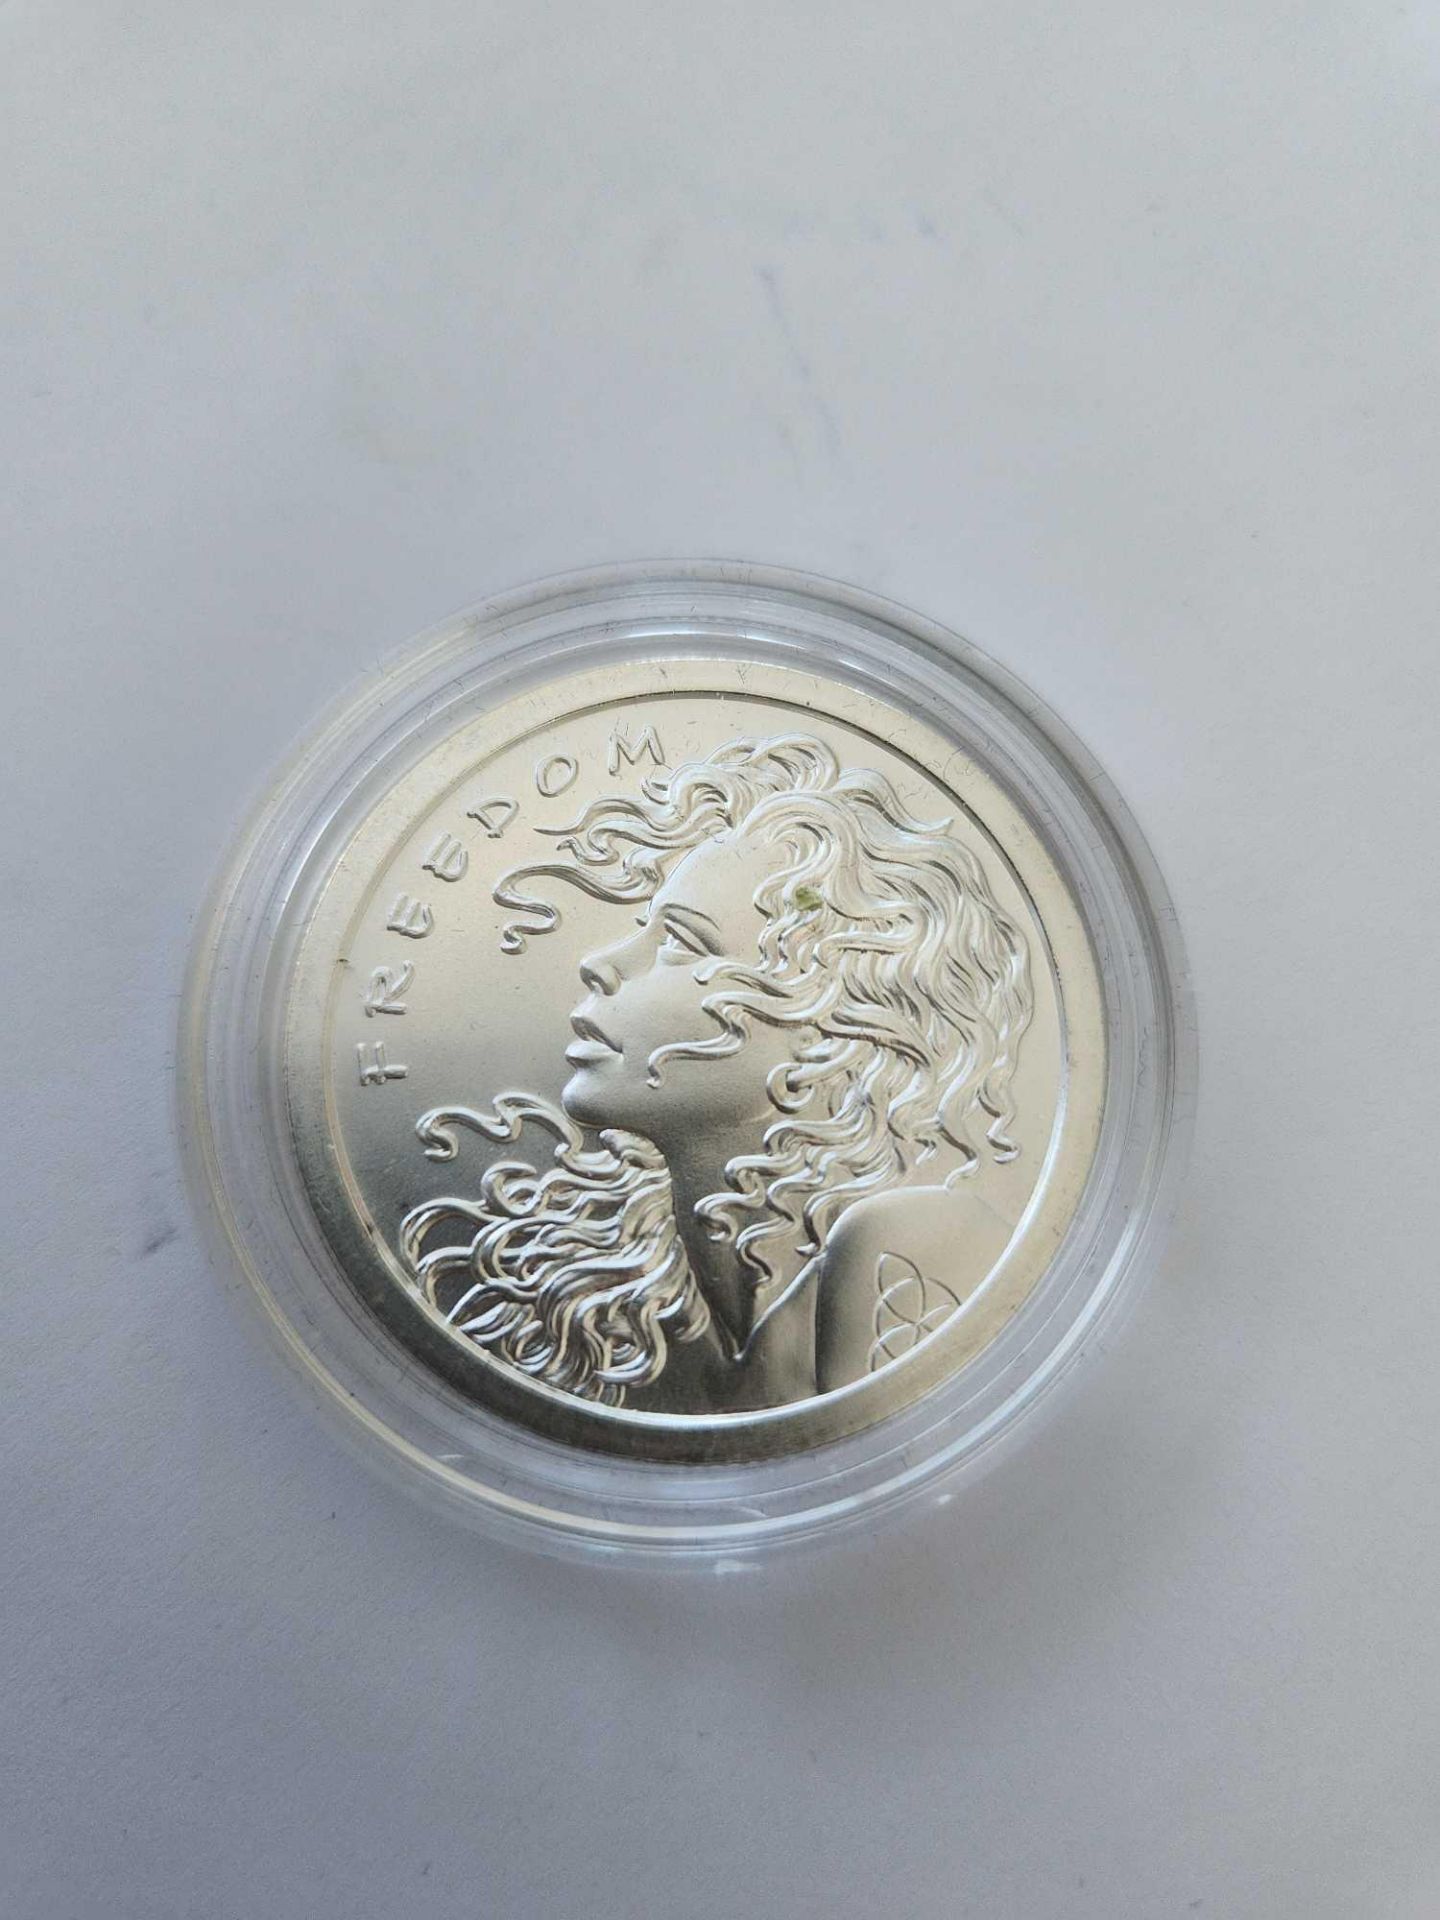 Silver Sheield Freedom Silver Coin - Image 4 of 4